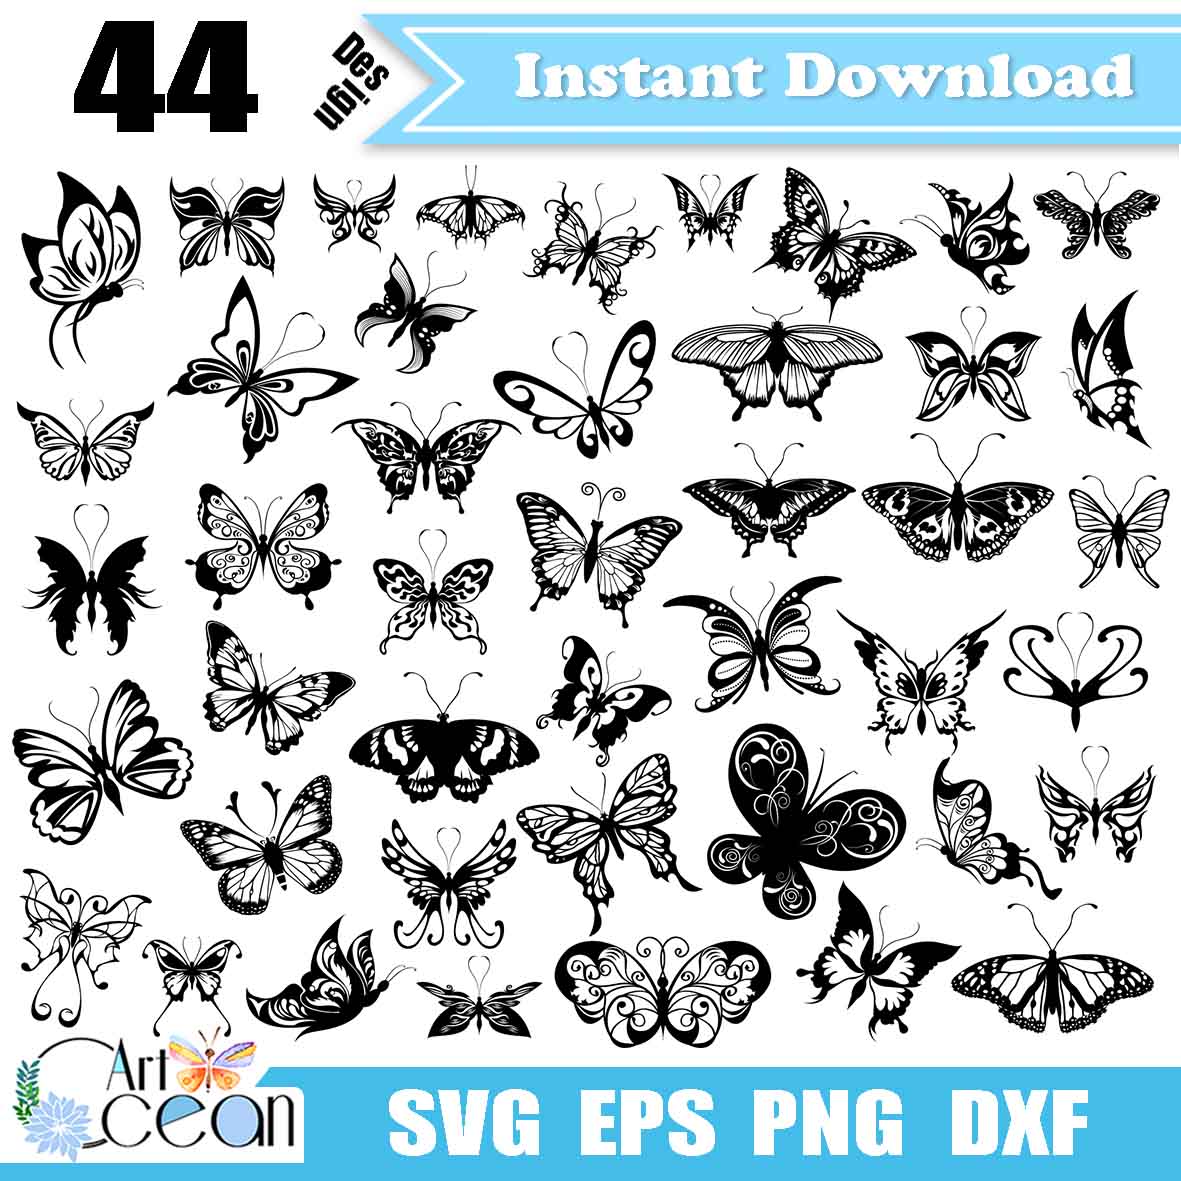 Butterfly svg,butterfly clipart,butterfly vector silhouette cut file